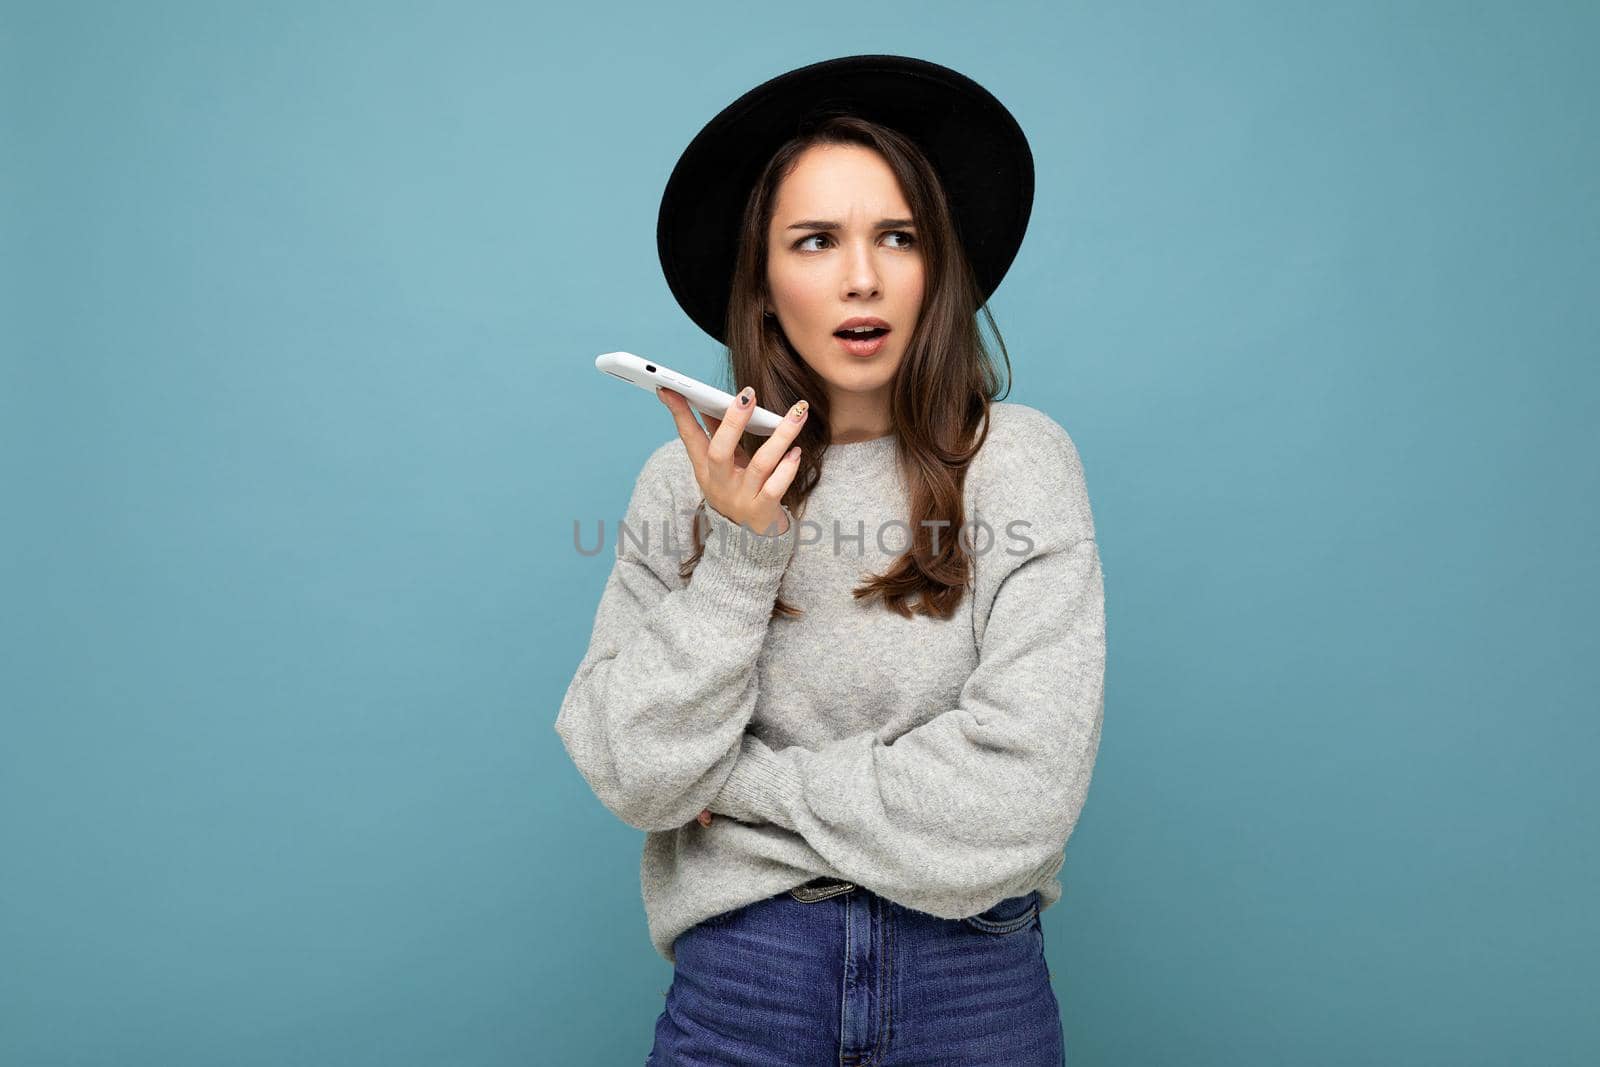 Beautiful young brunette woman thinking wearing black hat and grey sweater holding smartphone looking to the side texting isolated on background.